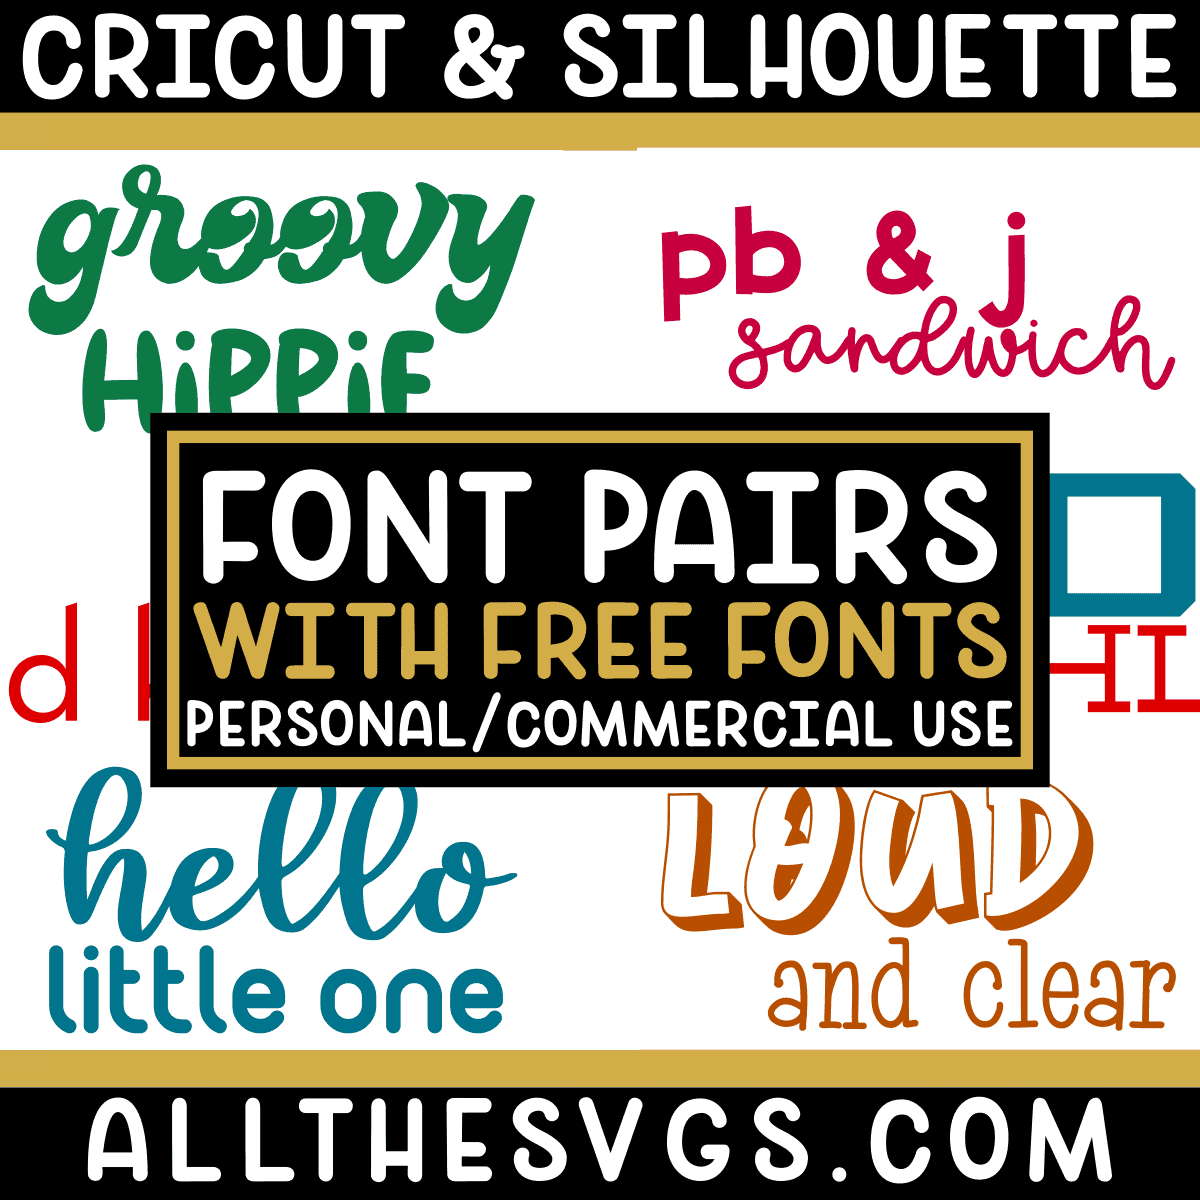 https://allthesvgs.com/wp-content/uploads/font-pairings-combos-free-commercial-personal-use-cricut-silhouette-logos-professional-graphic-design-poster.png